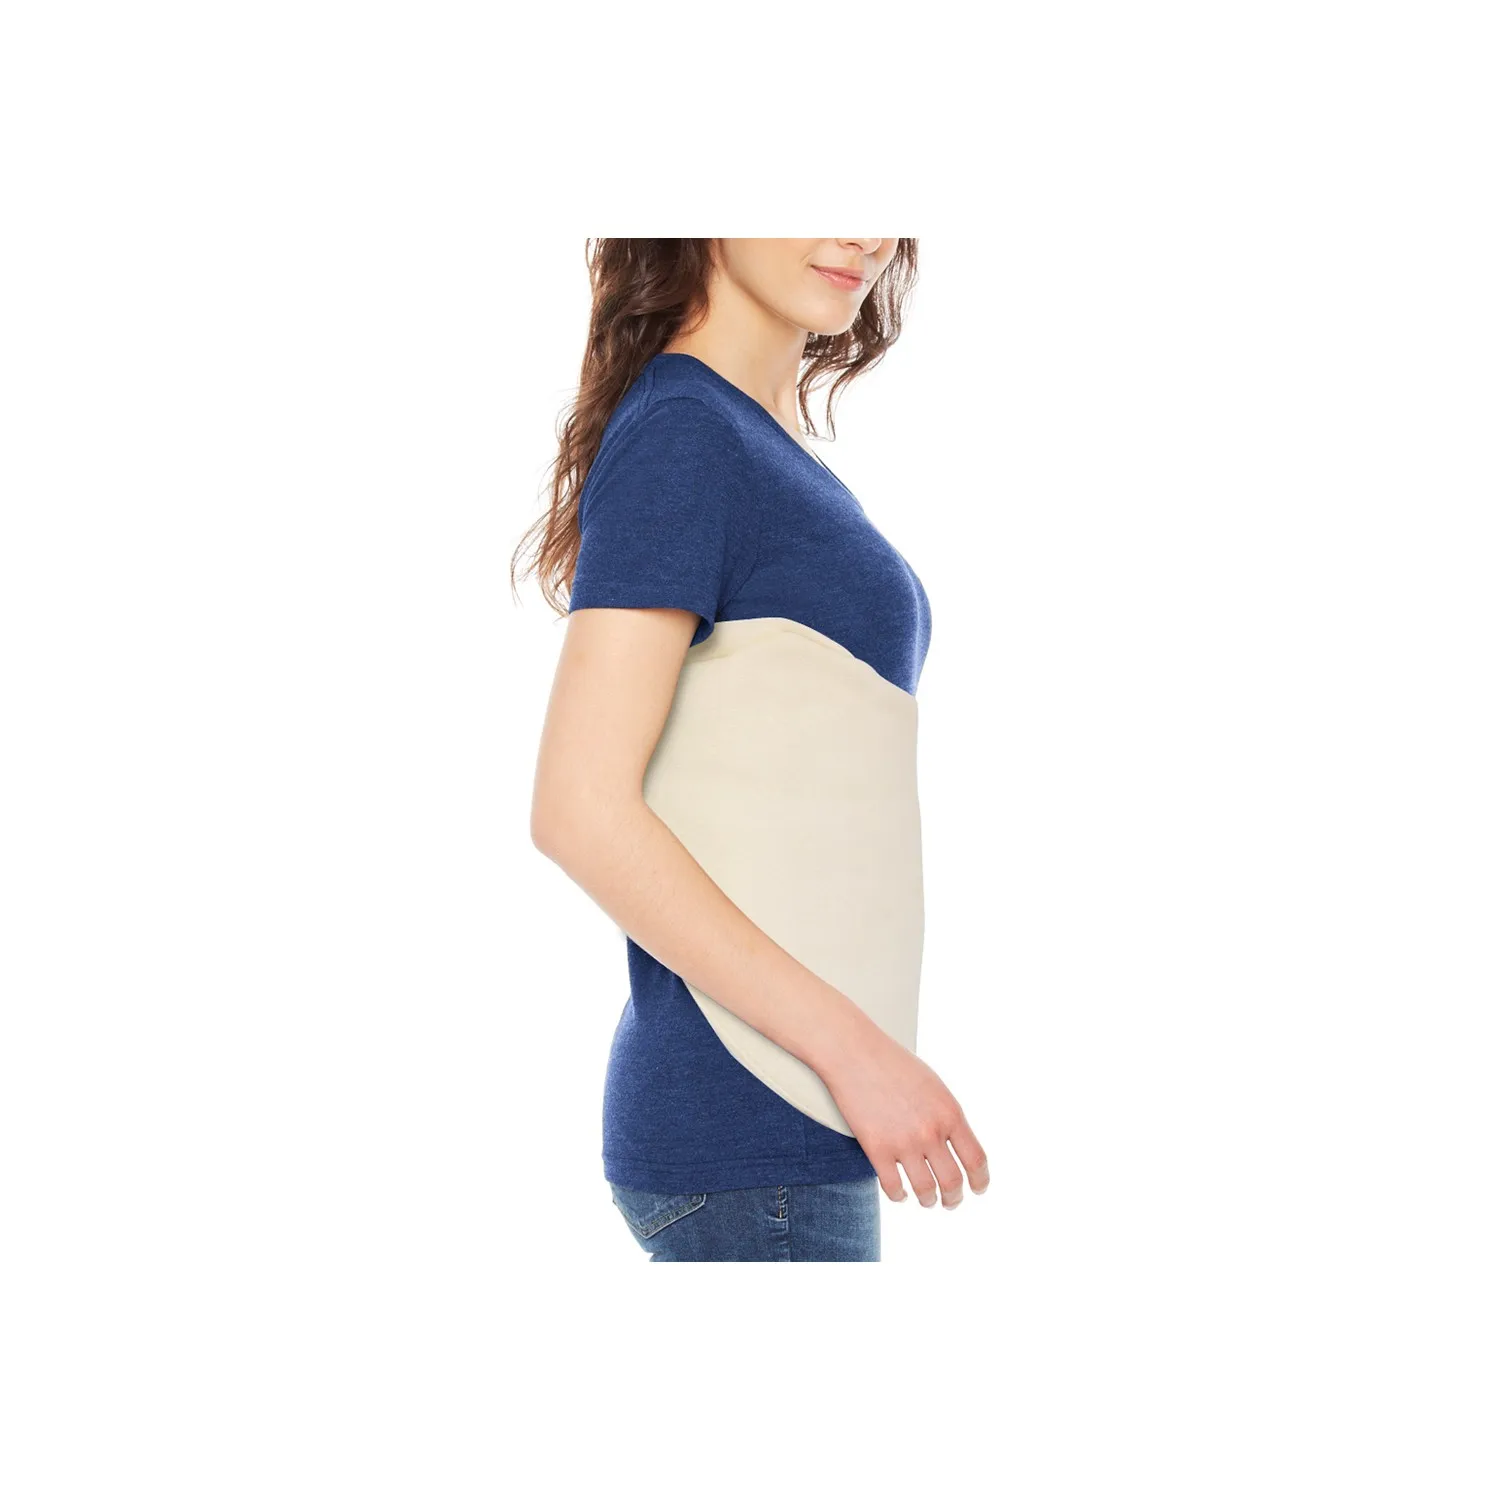 Enlarge Electric Waist Abdominal Warmer Can Be Very Suitable For People With Abdominal Pain, Muscle Contraction, Cystritis